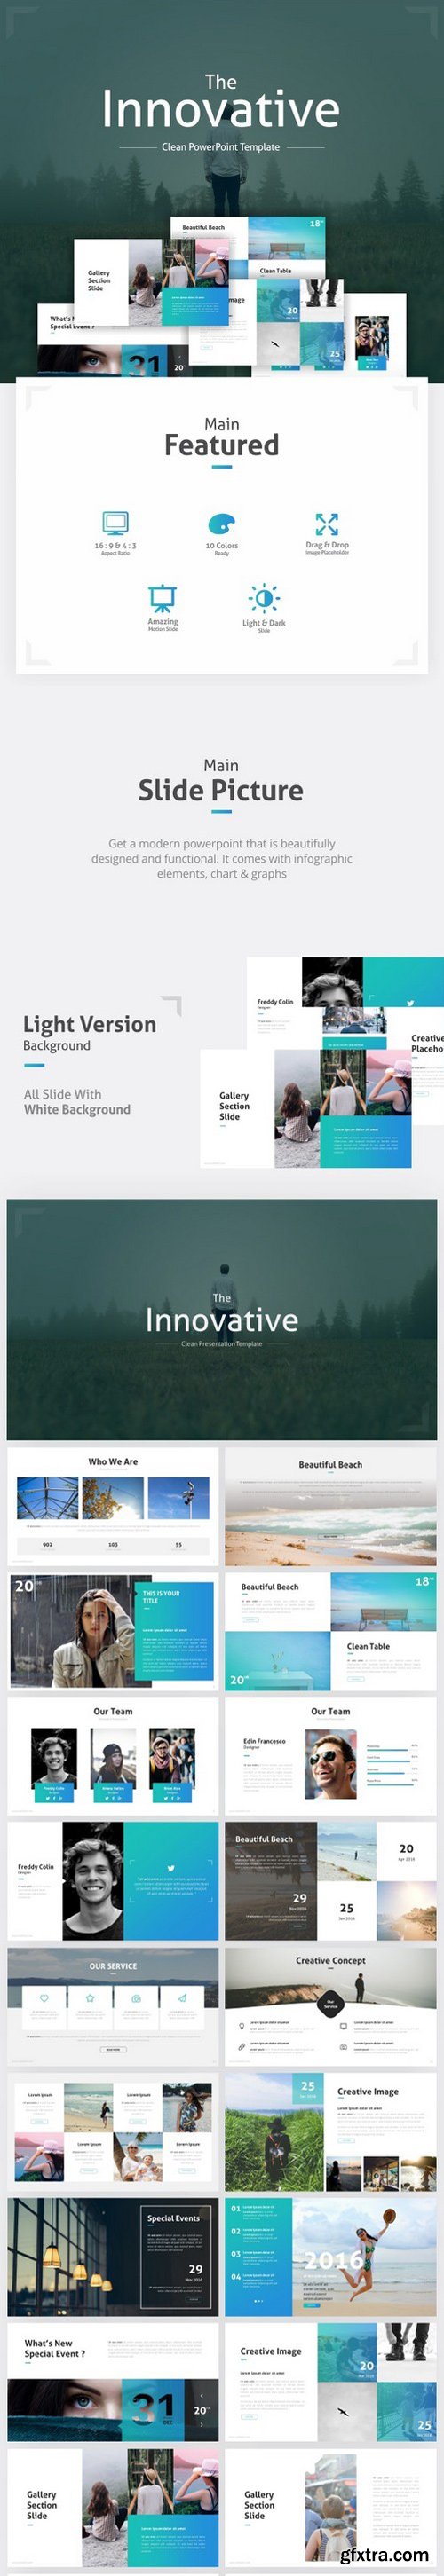 Graphicriver - The Innovative Clean Powerpoint Template 19237575